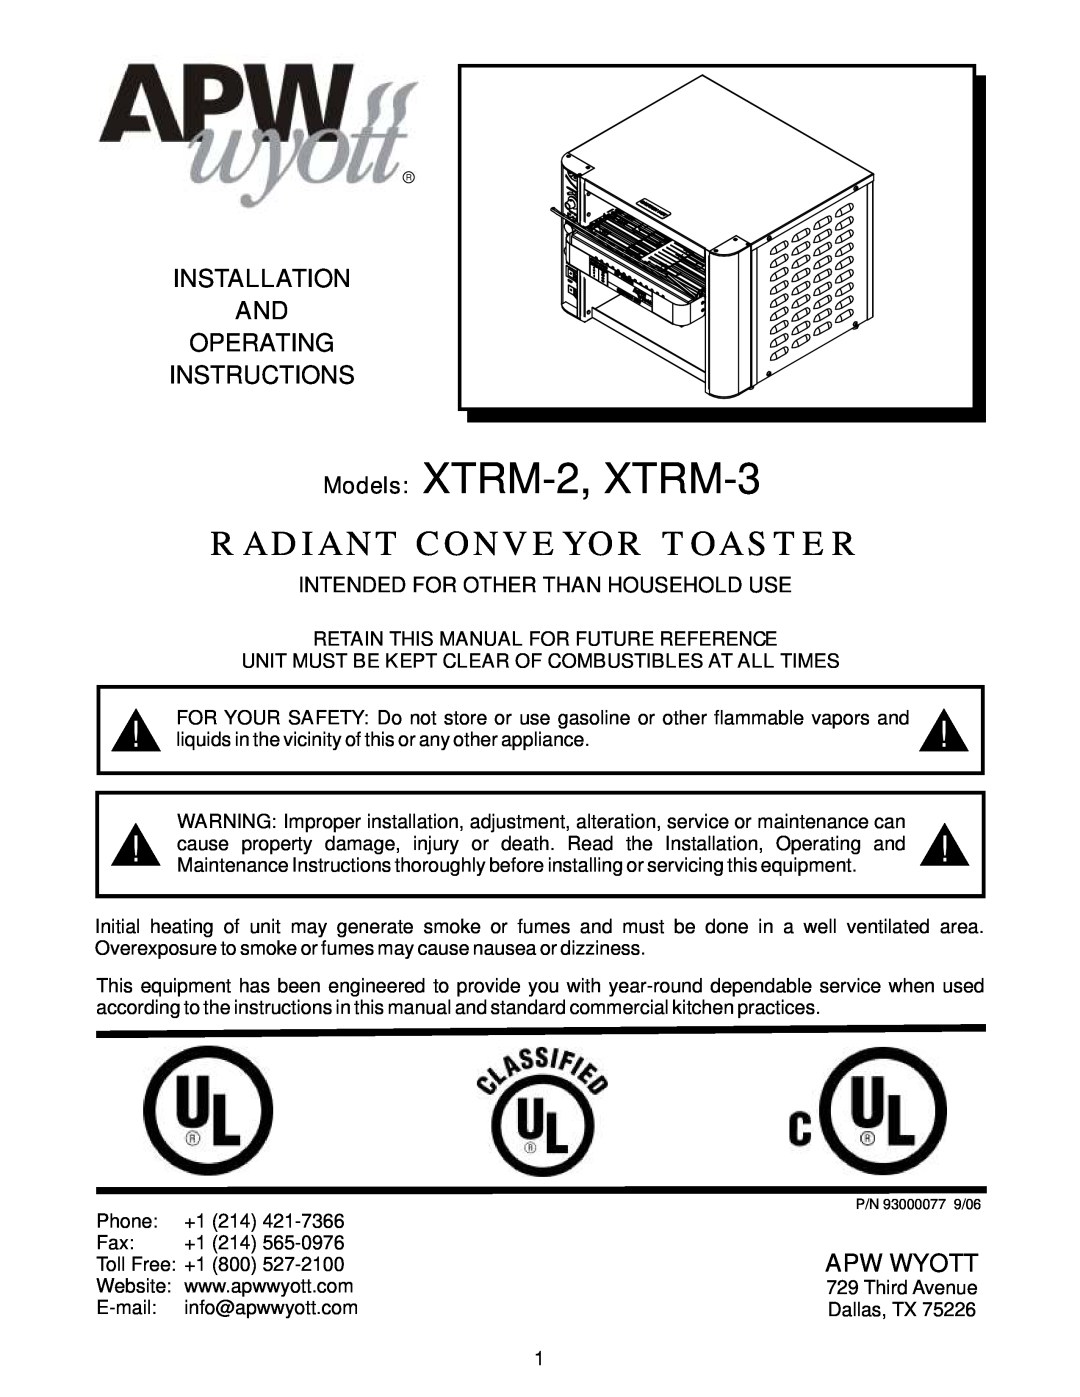 APW Wyott operating instructions Intended For Other Than Household Use, Models XTRM-2, XTRM-3, Radiant Conveyor Toaster 